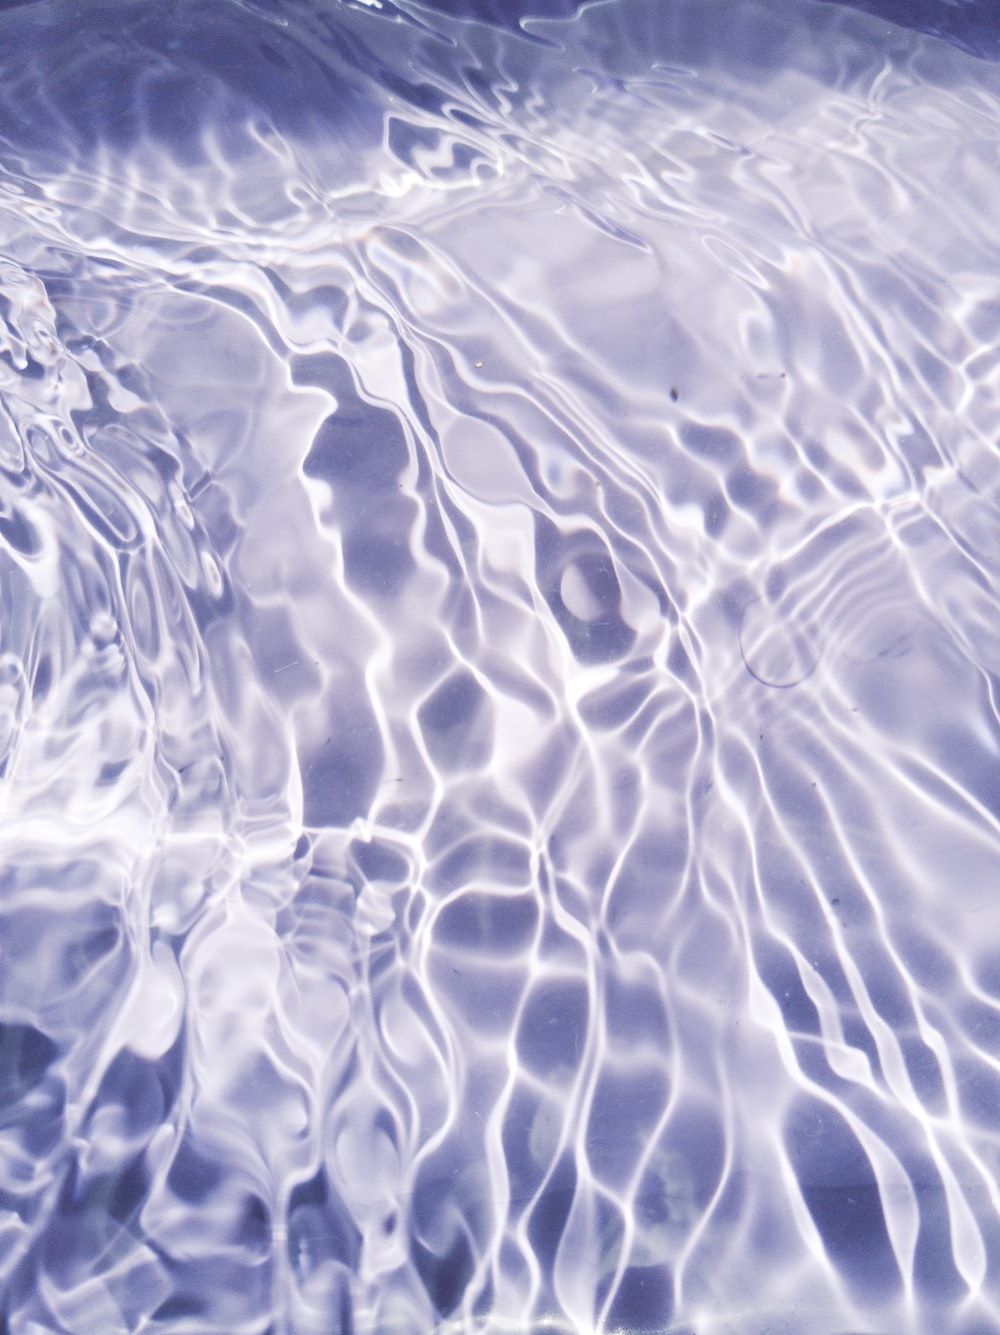 A close up of water with ripples - Water